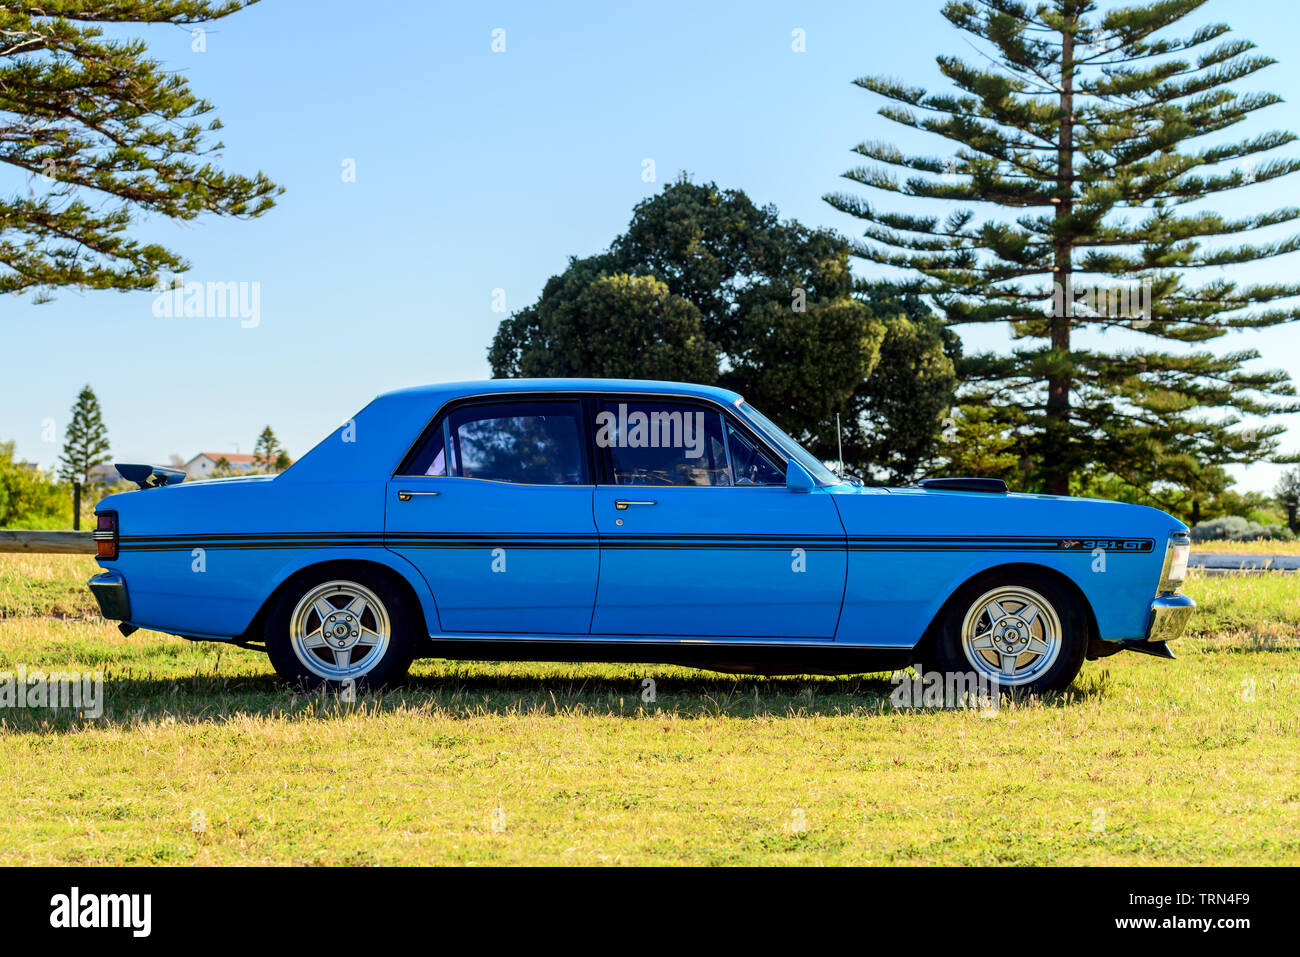 Port Adelaide, South Australia - October 14, 2017: Side view of iconic Australian made Ford Falcon 351-GT parked on the grass on a day Stock Photo